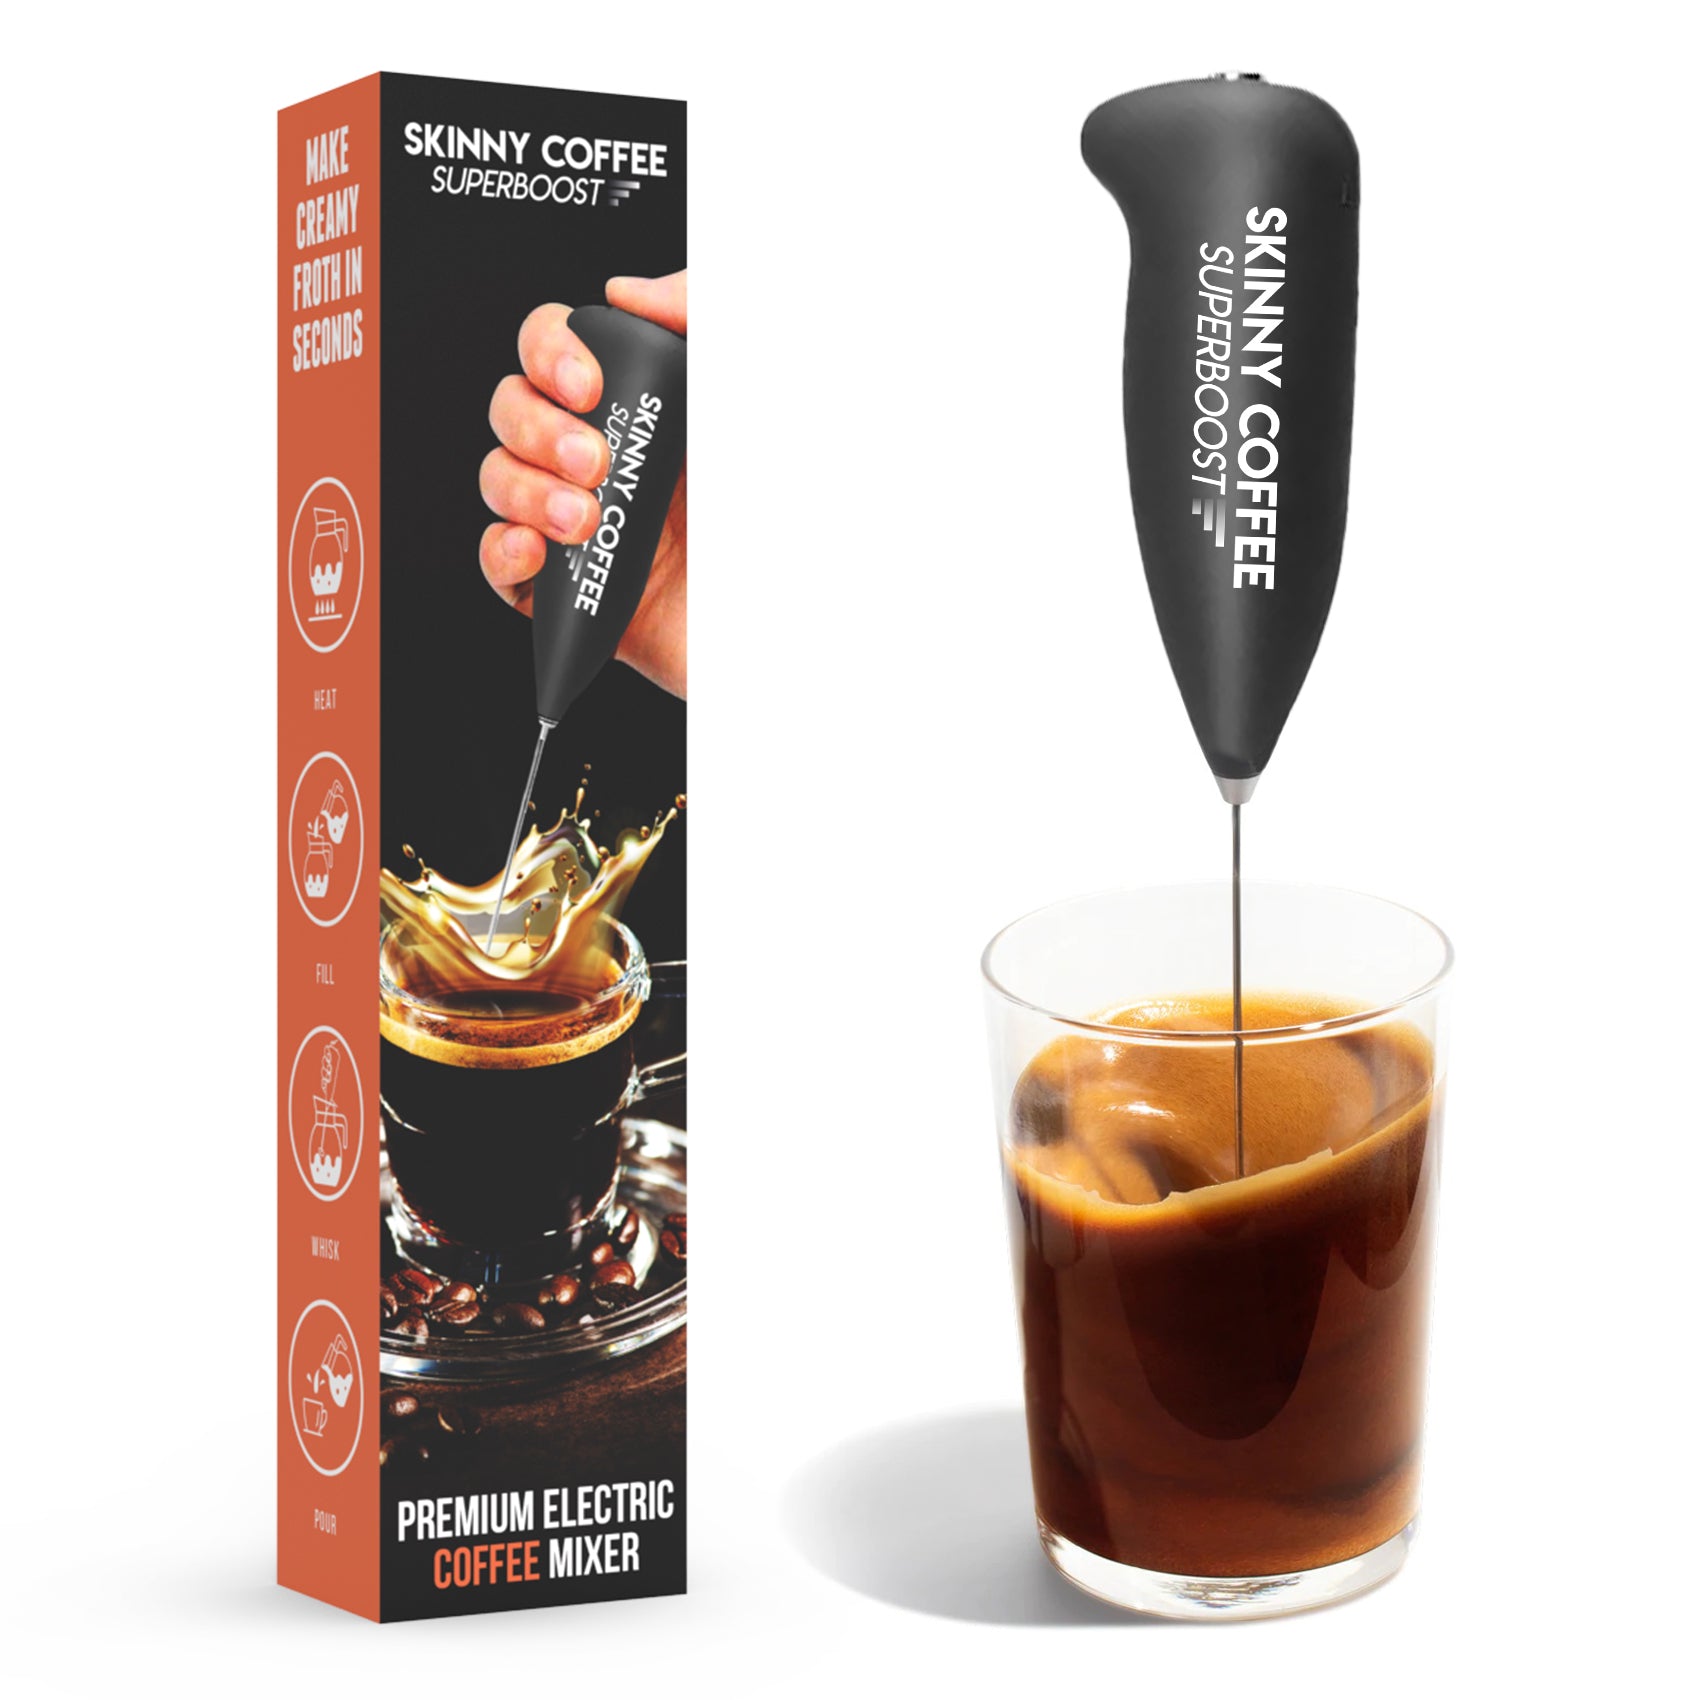 Electric Coffee Mixer – Skinny Coffee SuperBoost